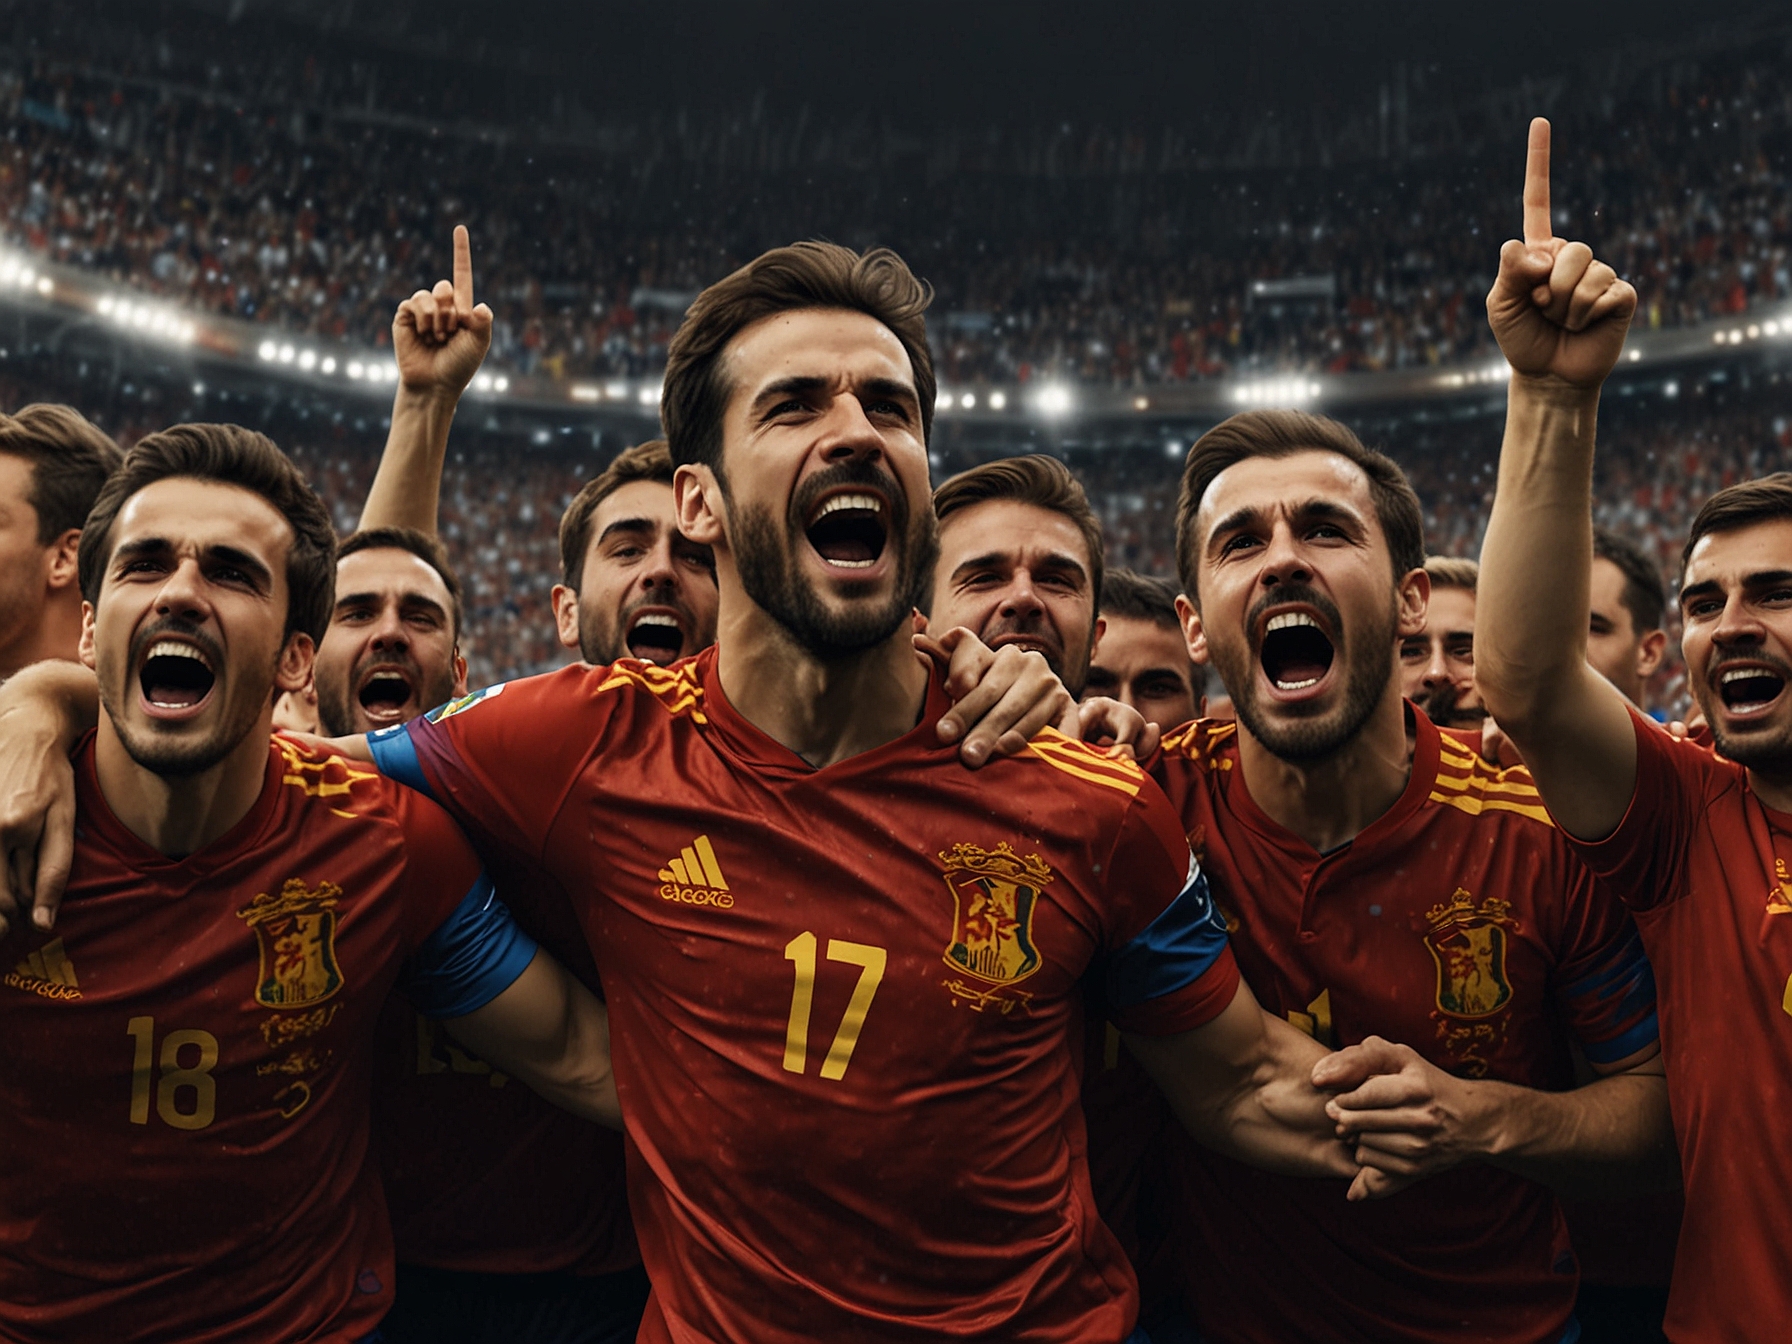 Spain celebrates after scoring a goal against Croatia in their Euro 2024 opening match, showing their dominance in the game.